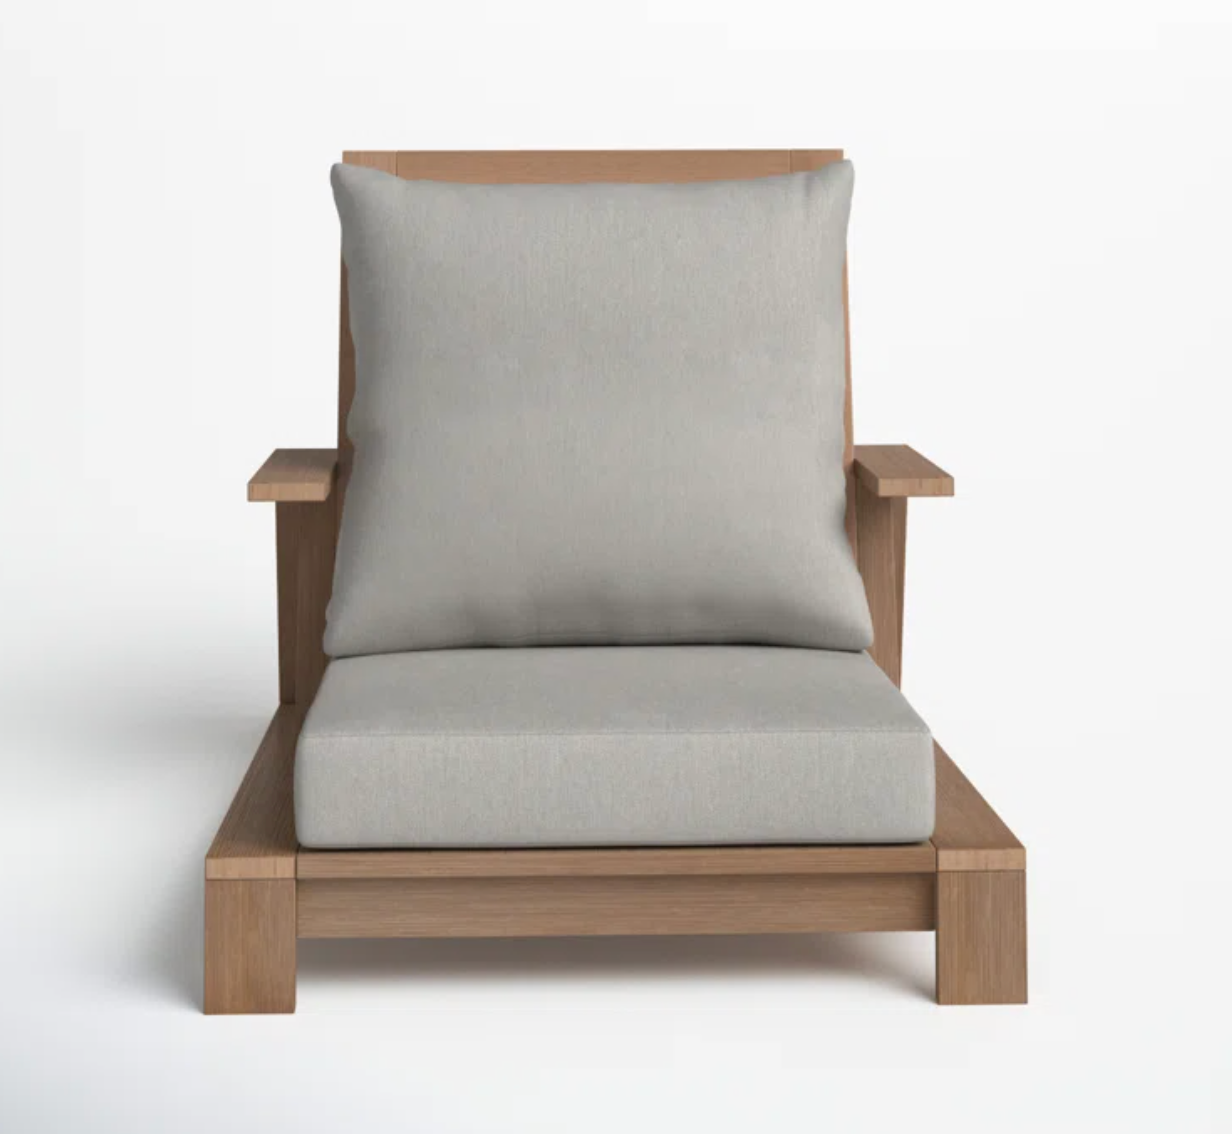 TEAK WOOD LOUNGE CHAIR WITH BEIGE LINEN CUSHIONS